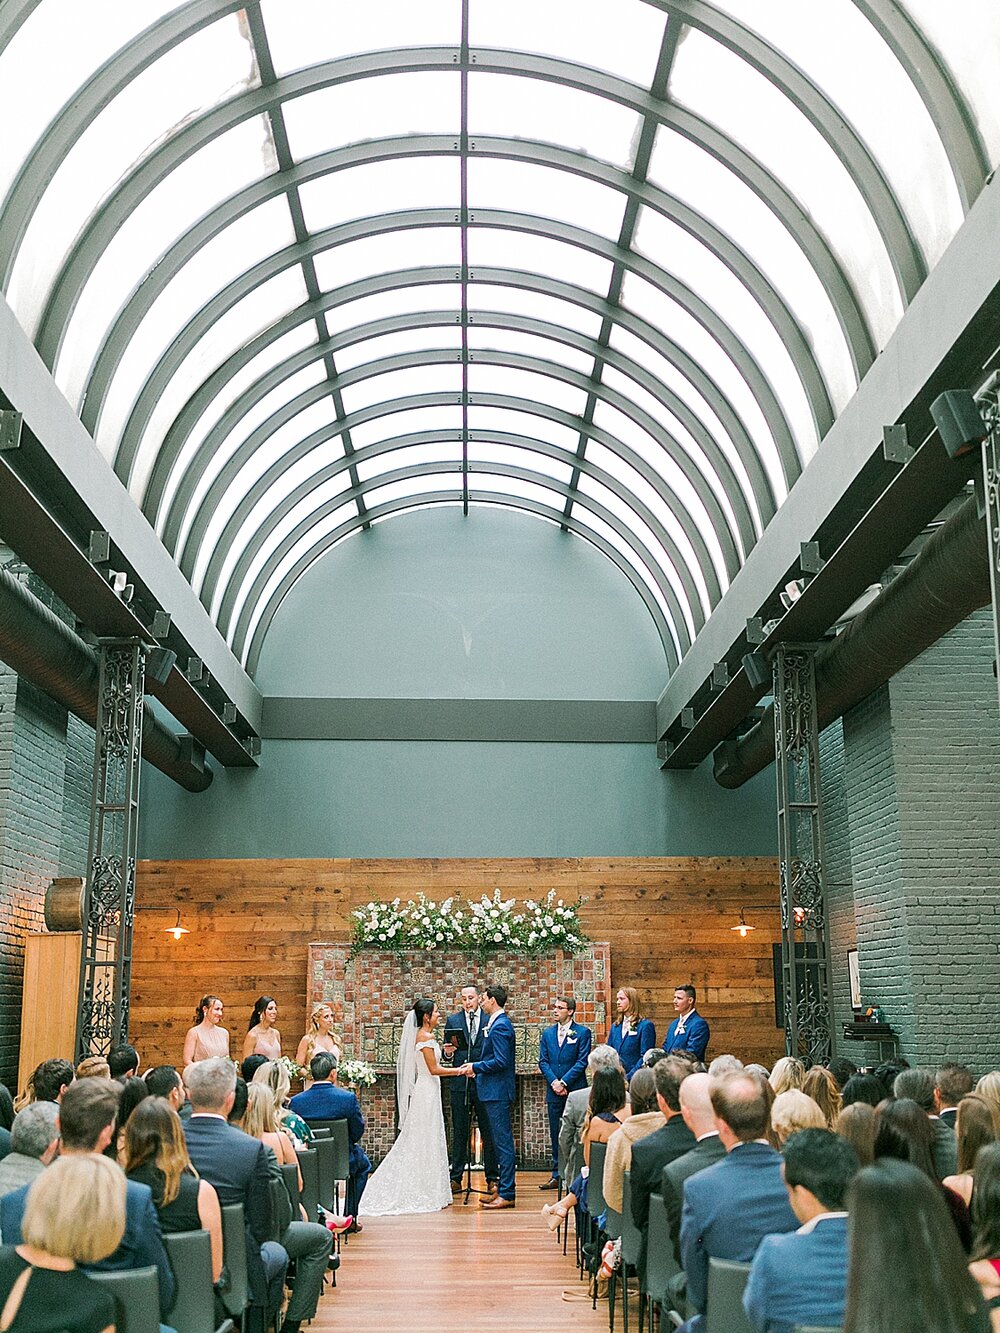 The Milling Room on the Upper West Side | Tri-State area wedding venues photographed by Asher Gardner Photography